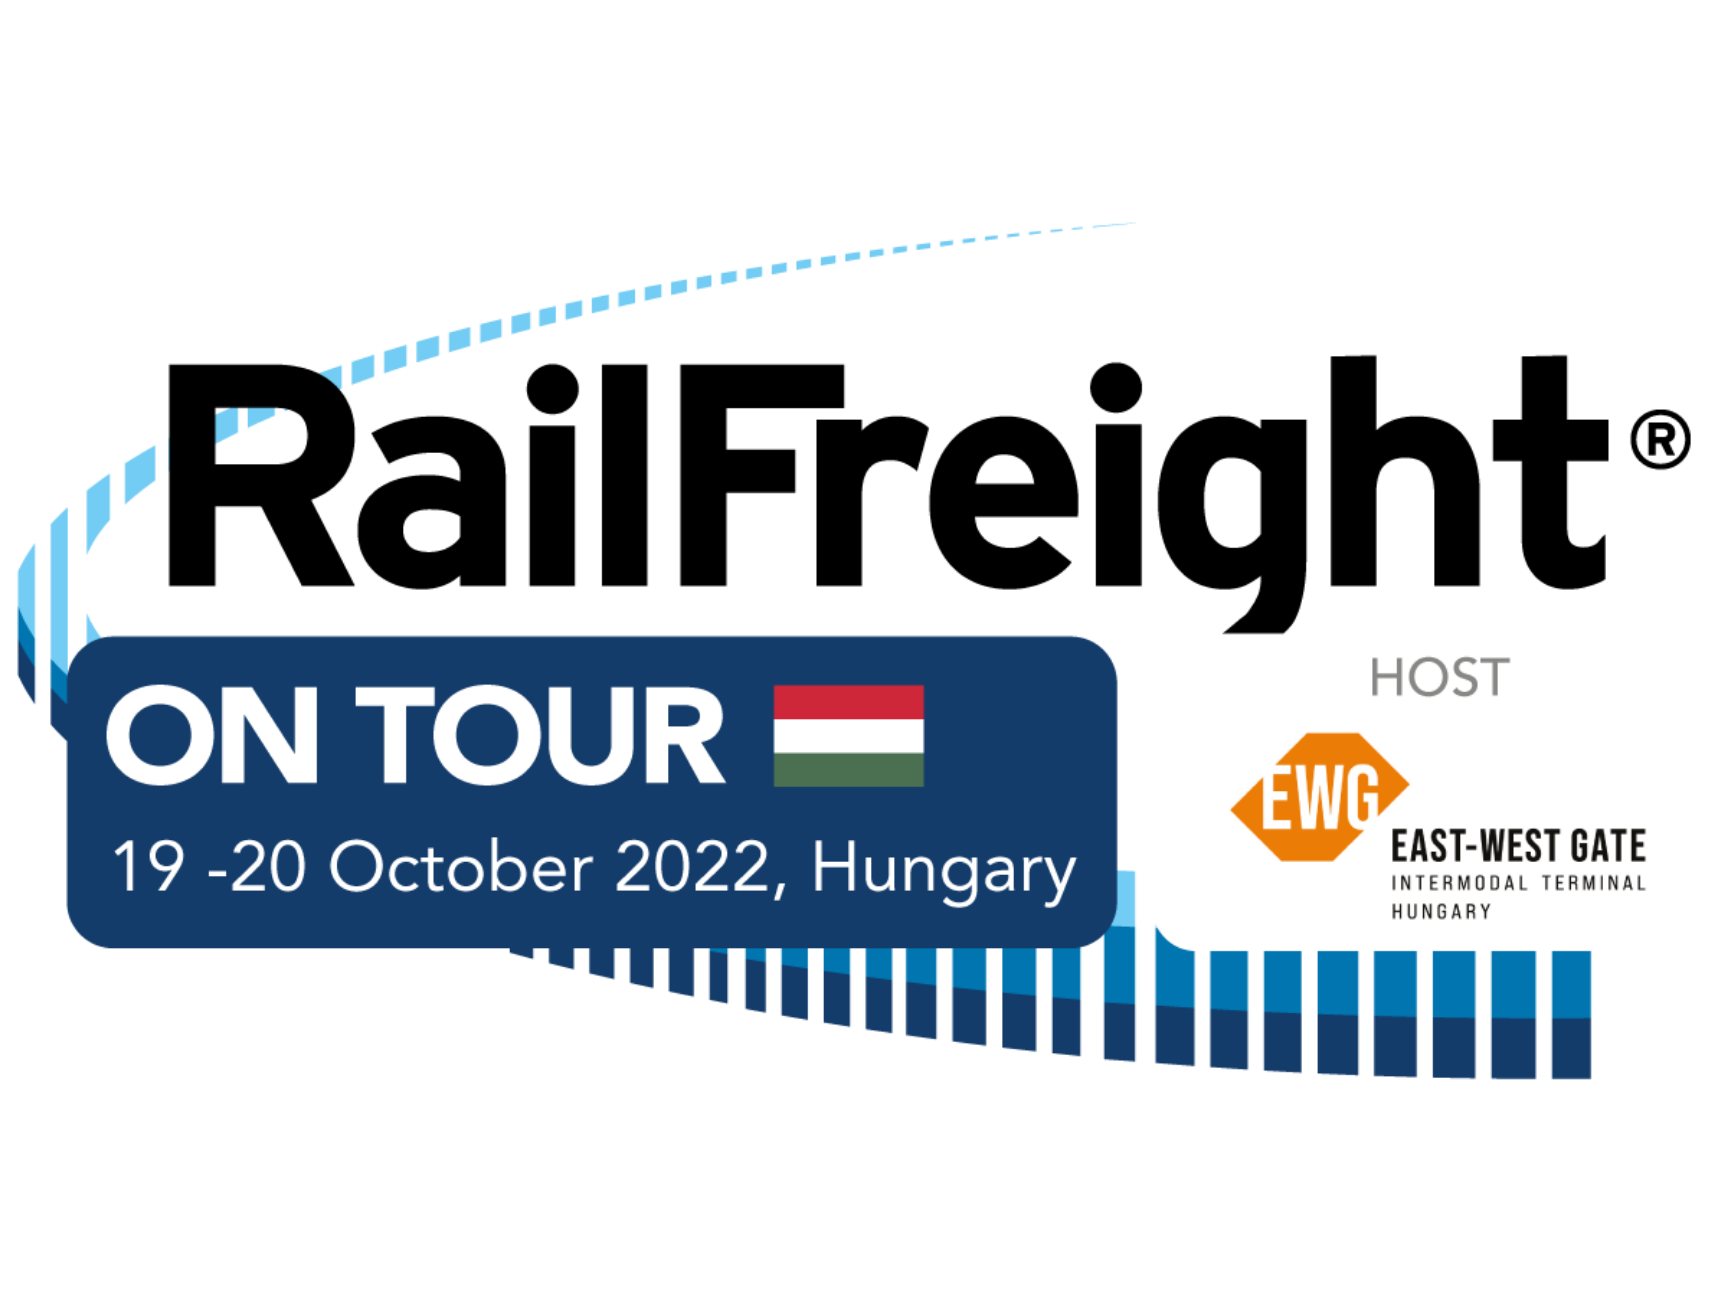 RailFreight on Tour - The Hungarian Edition